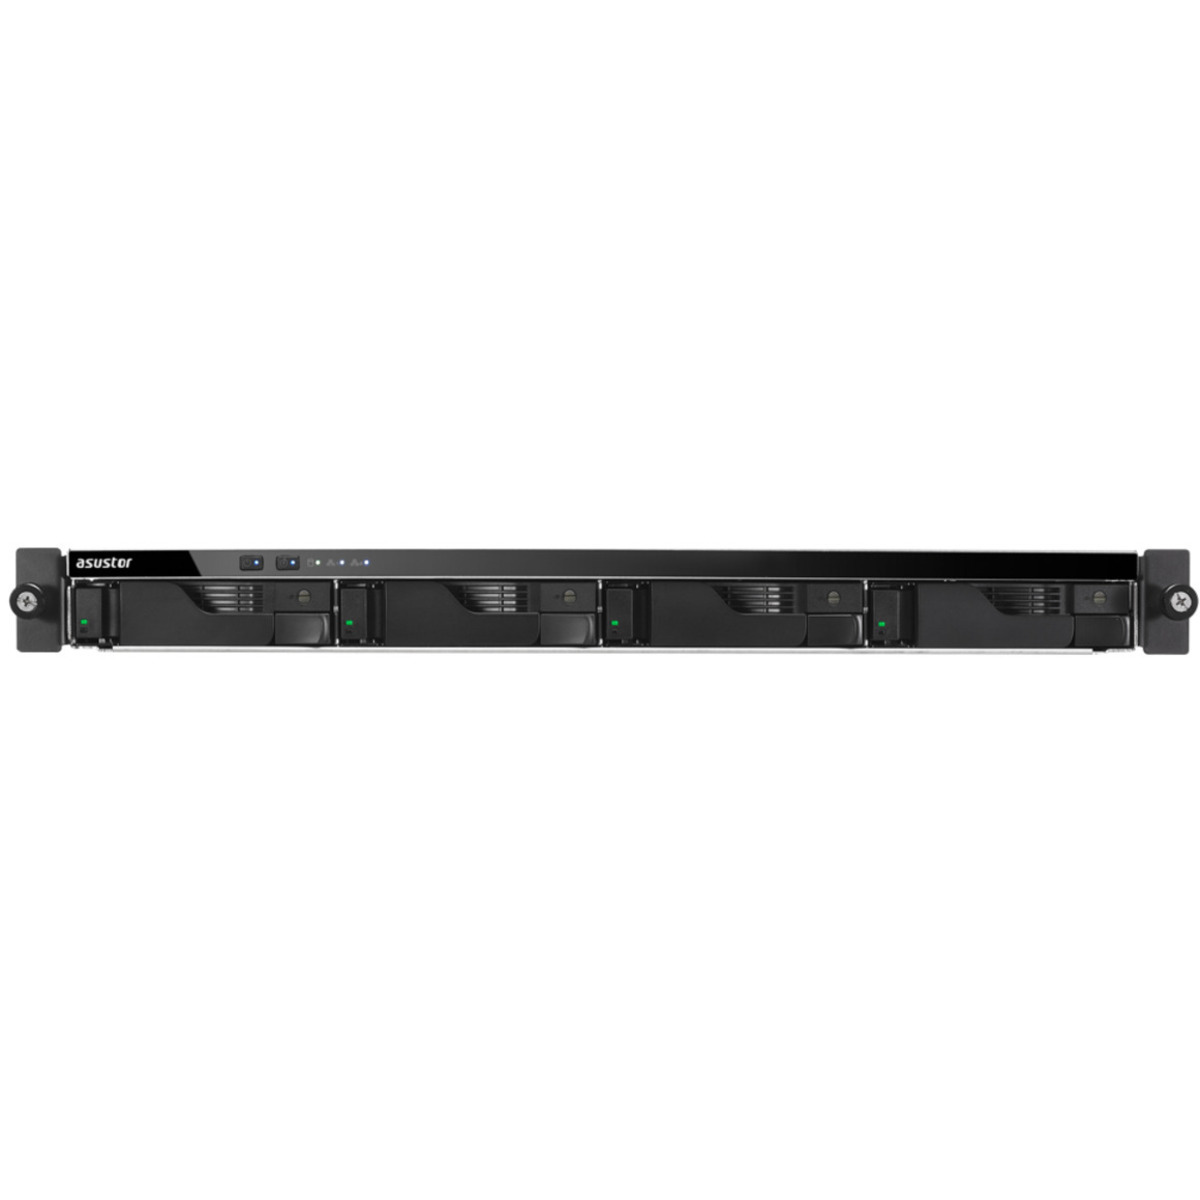 ASUSTOR LOCKERSTOR 4RS AS6504RS 24tb 4-Bay RackMount Multimedia / Power User / Business NAS - Network Attached Storage Device 4x6tb Western Digital Gold WD6004FRYZ 3.5 7200rpm SATA 6Gb/s HDD ENTERPRISE Class Drives Installed - Burn-In Tested - FREE RAM UPGRADE LOCKERSTOR 4RS AS6504RS